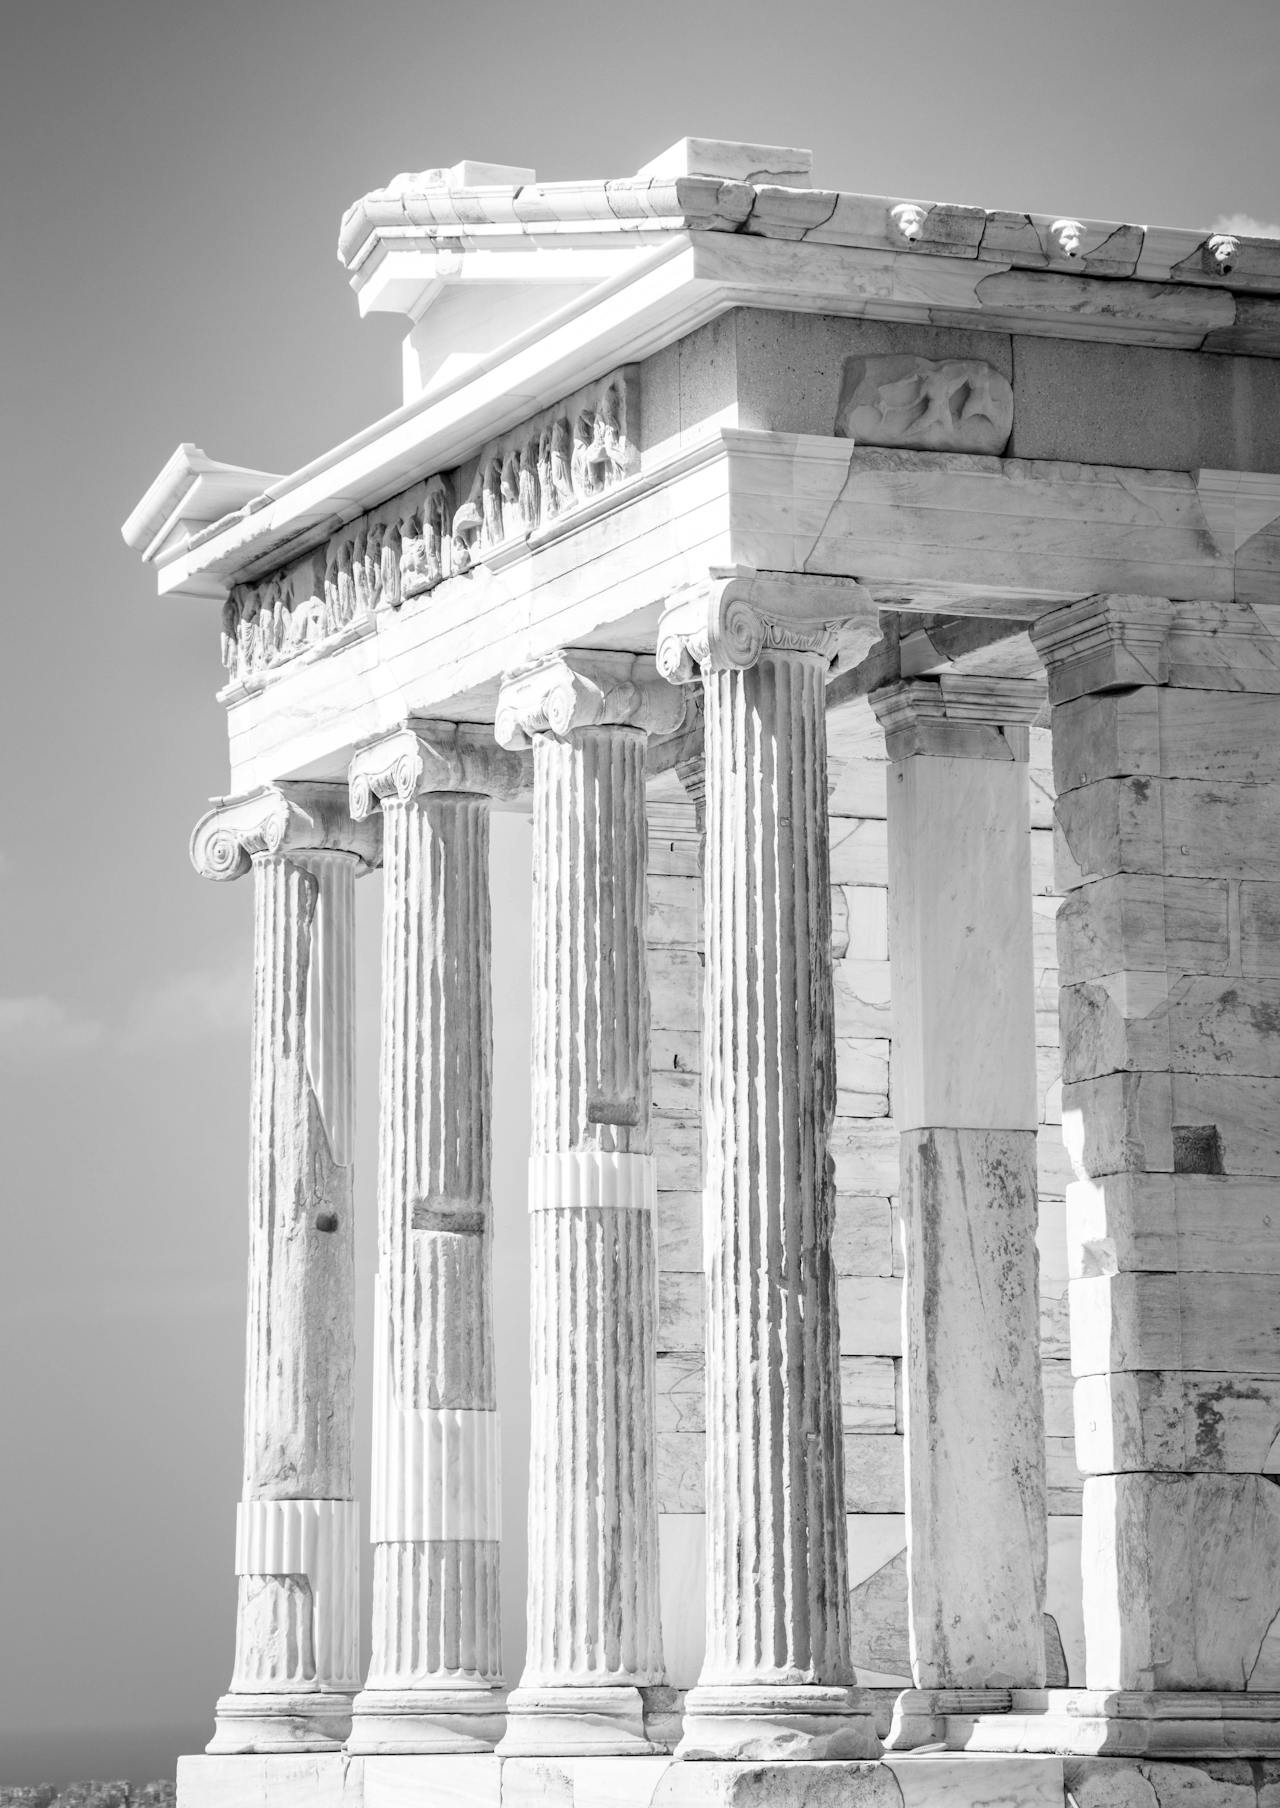 View of the Parthenon in Athens with luggage storage nearby